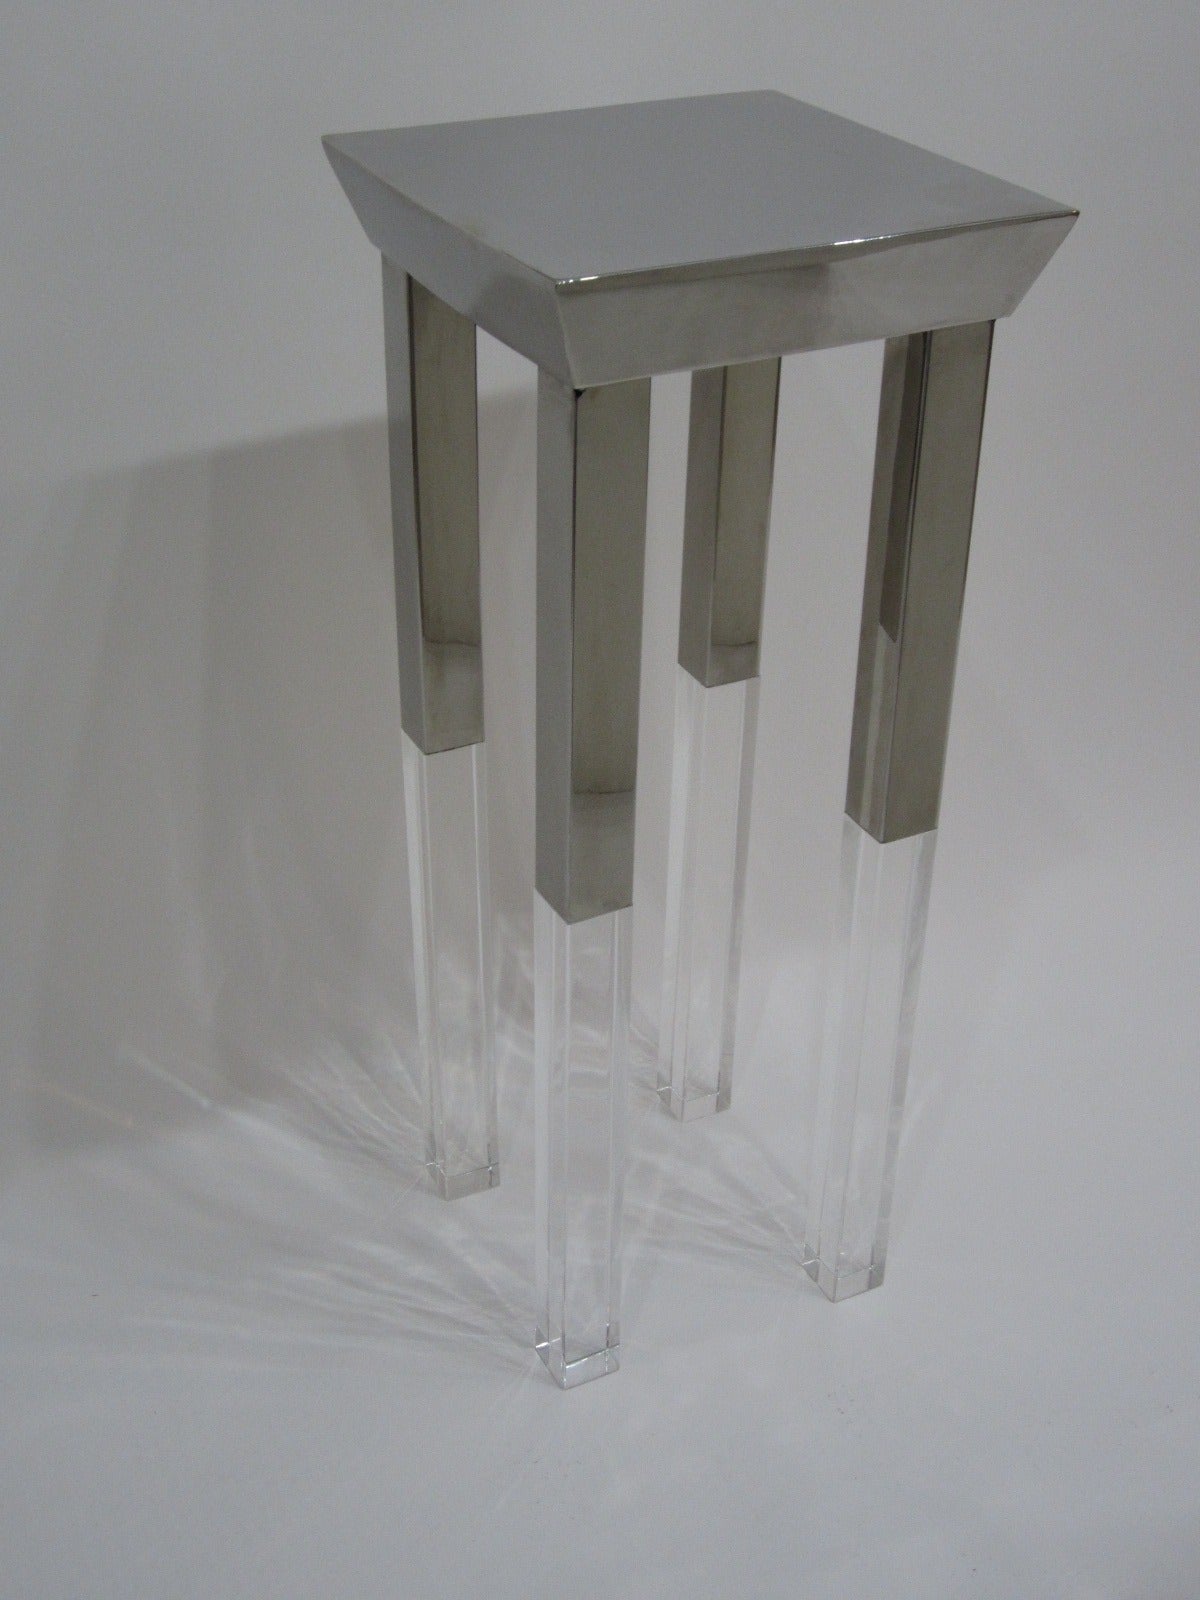 Gorgeous polished steel-top and partial leg side table with the balance of the legs in Lucite block. The sides of the top surface are inverted creating this fantastic look. Great as a lamp or sculpture table. Visible welding on bottom of table in